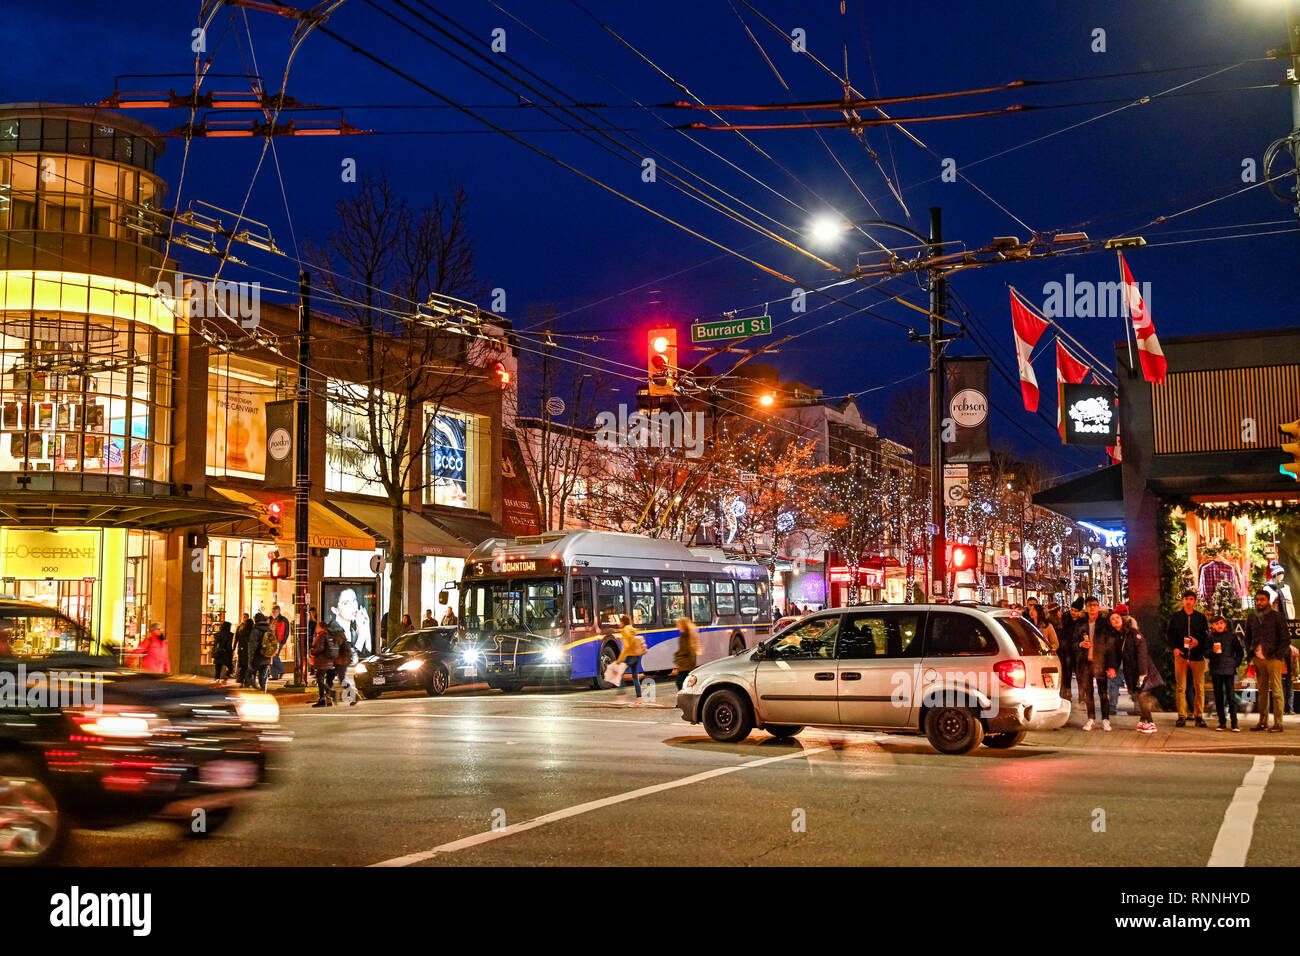 https://c8.alamy.com/comp/RNNHYD/busy-night-time-shoppers-and-traffic-robson-street-vancouver-british-columbia-canada-RNNHYD.jpg